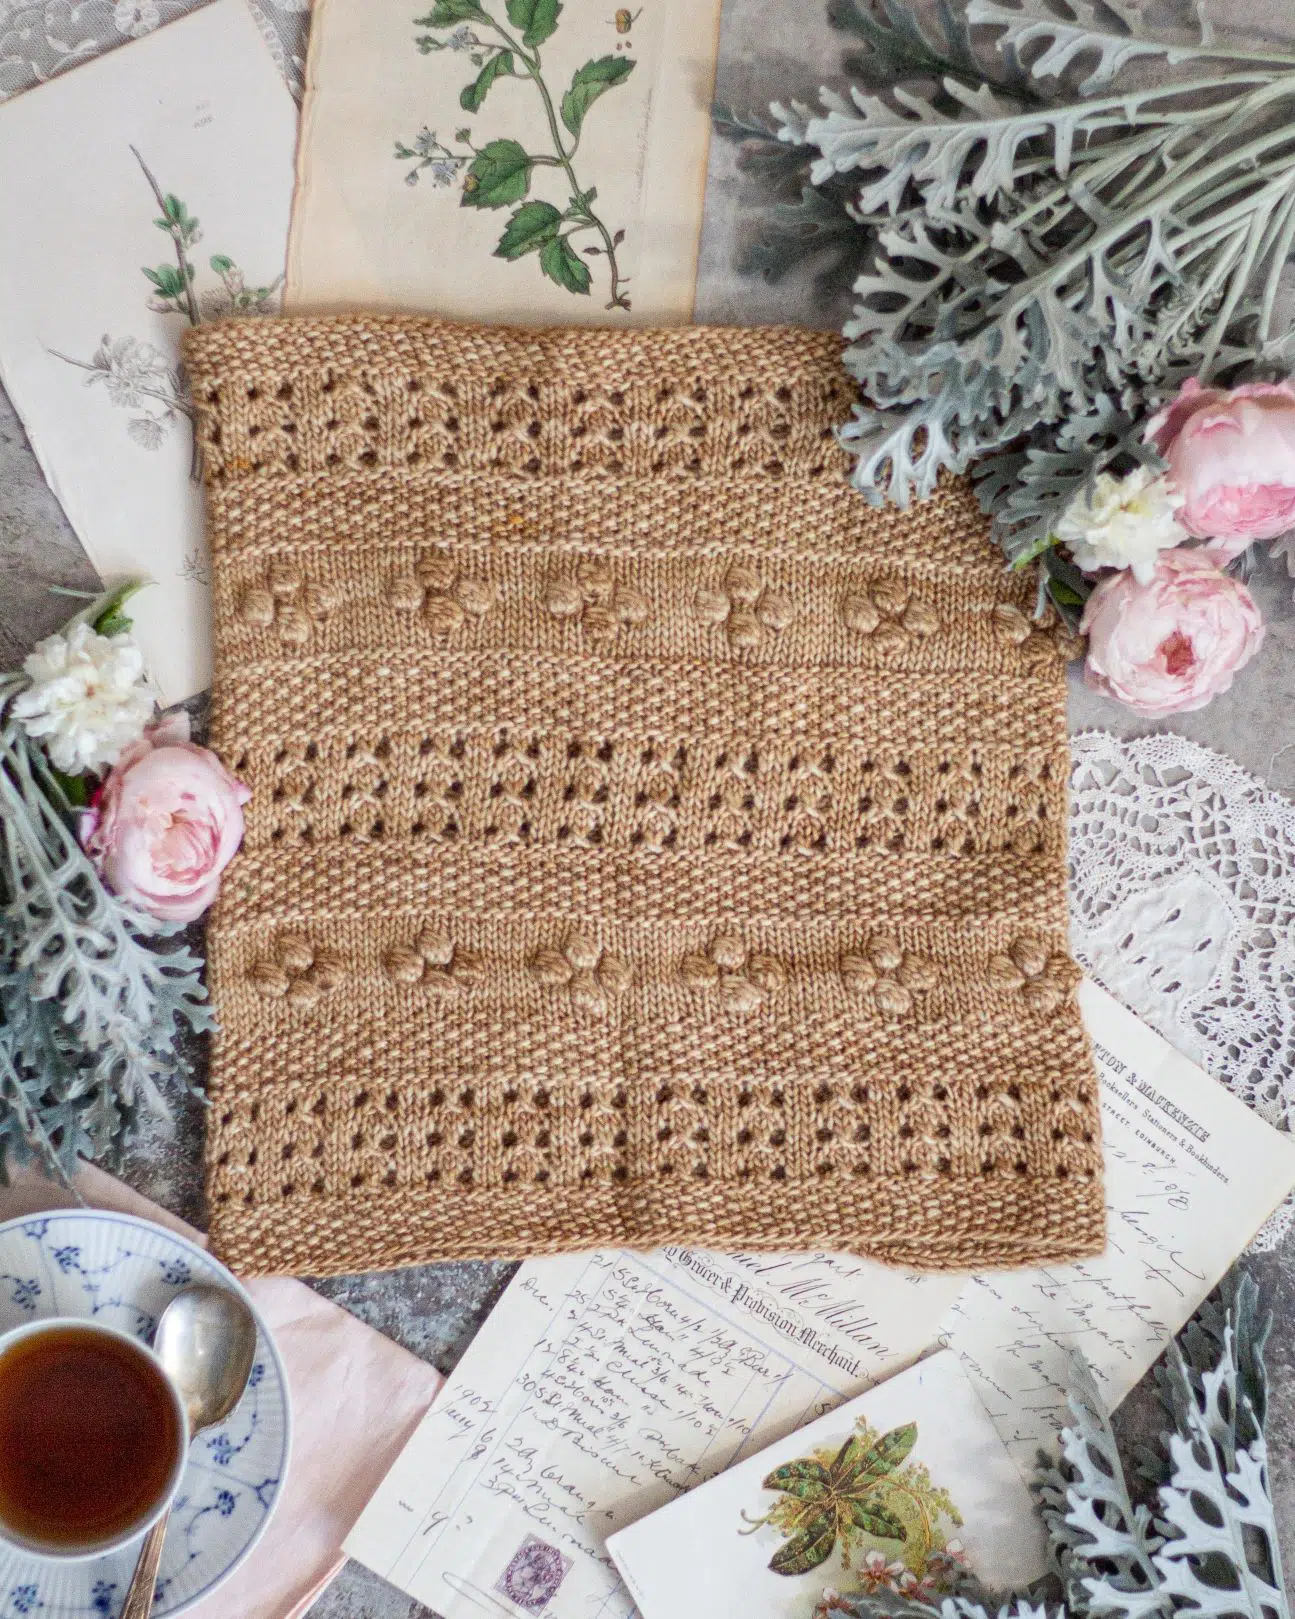 A golden-colored cowl with alternating rows of eyelets, bobbles, and seed stitch is laid flat and surrounded by pink and white roses, antique paper ephemera, and a blue and white teacup. The photo is shot from the top straight down.